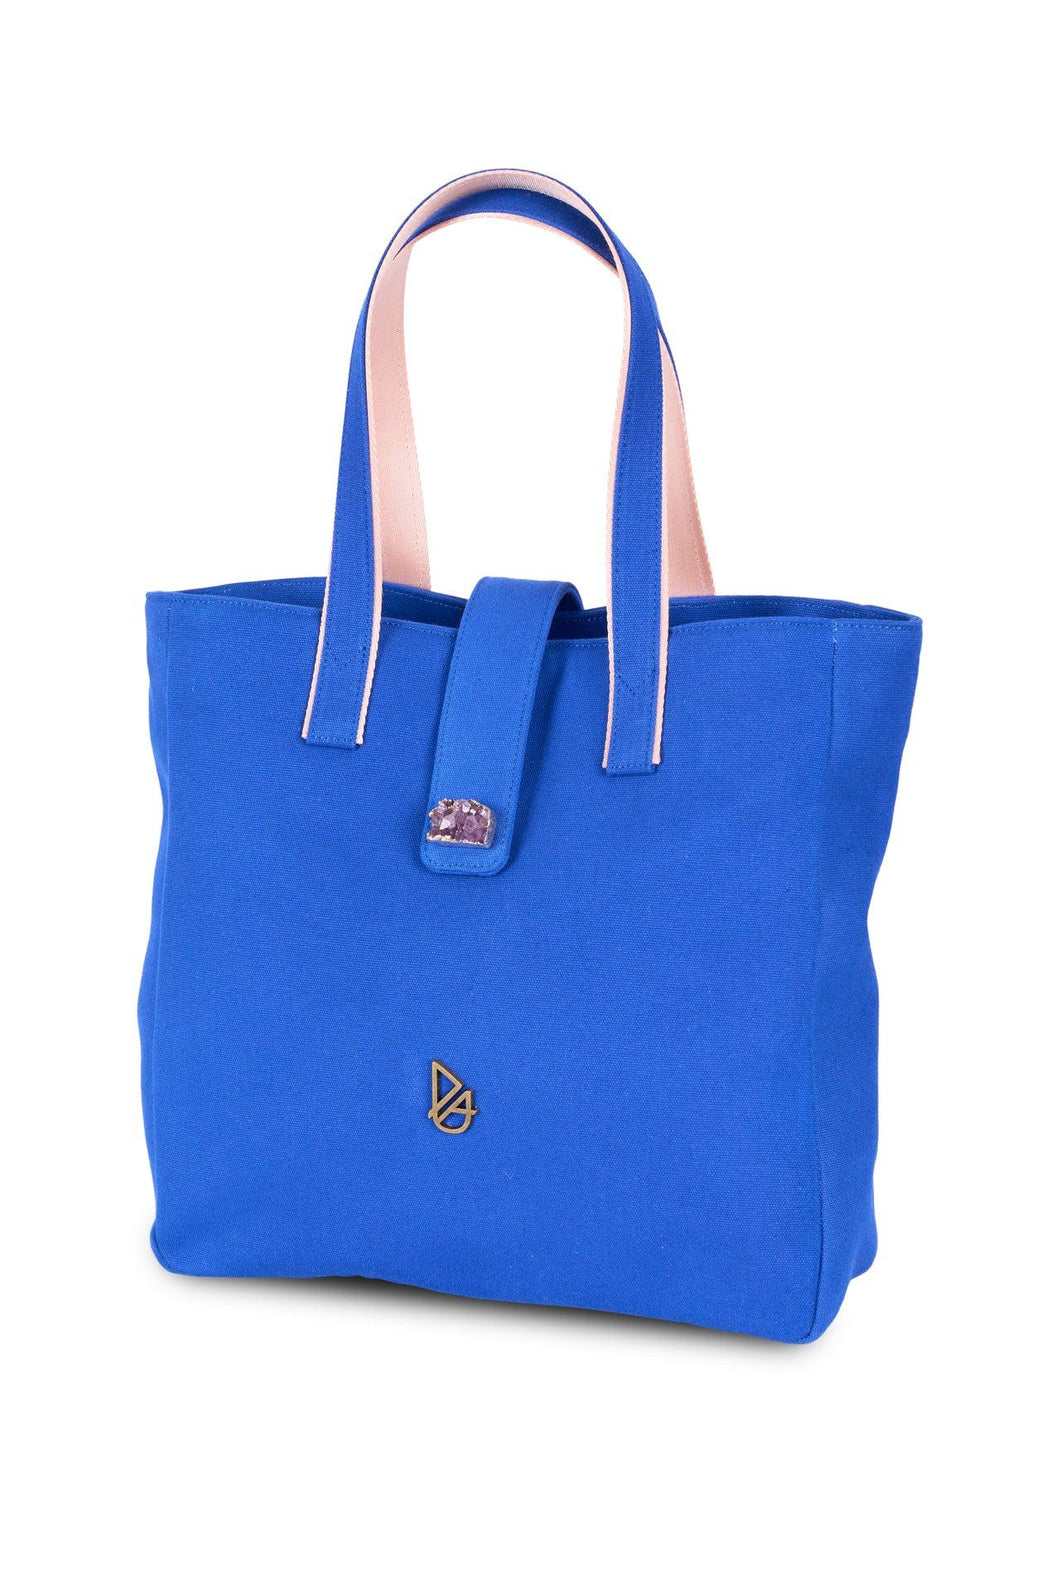 Blue Sustainable Tote Bag